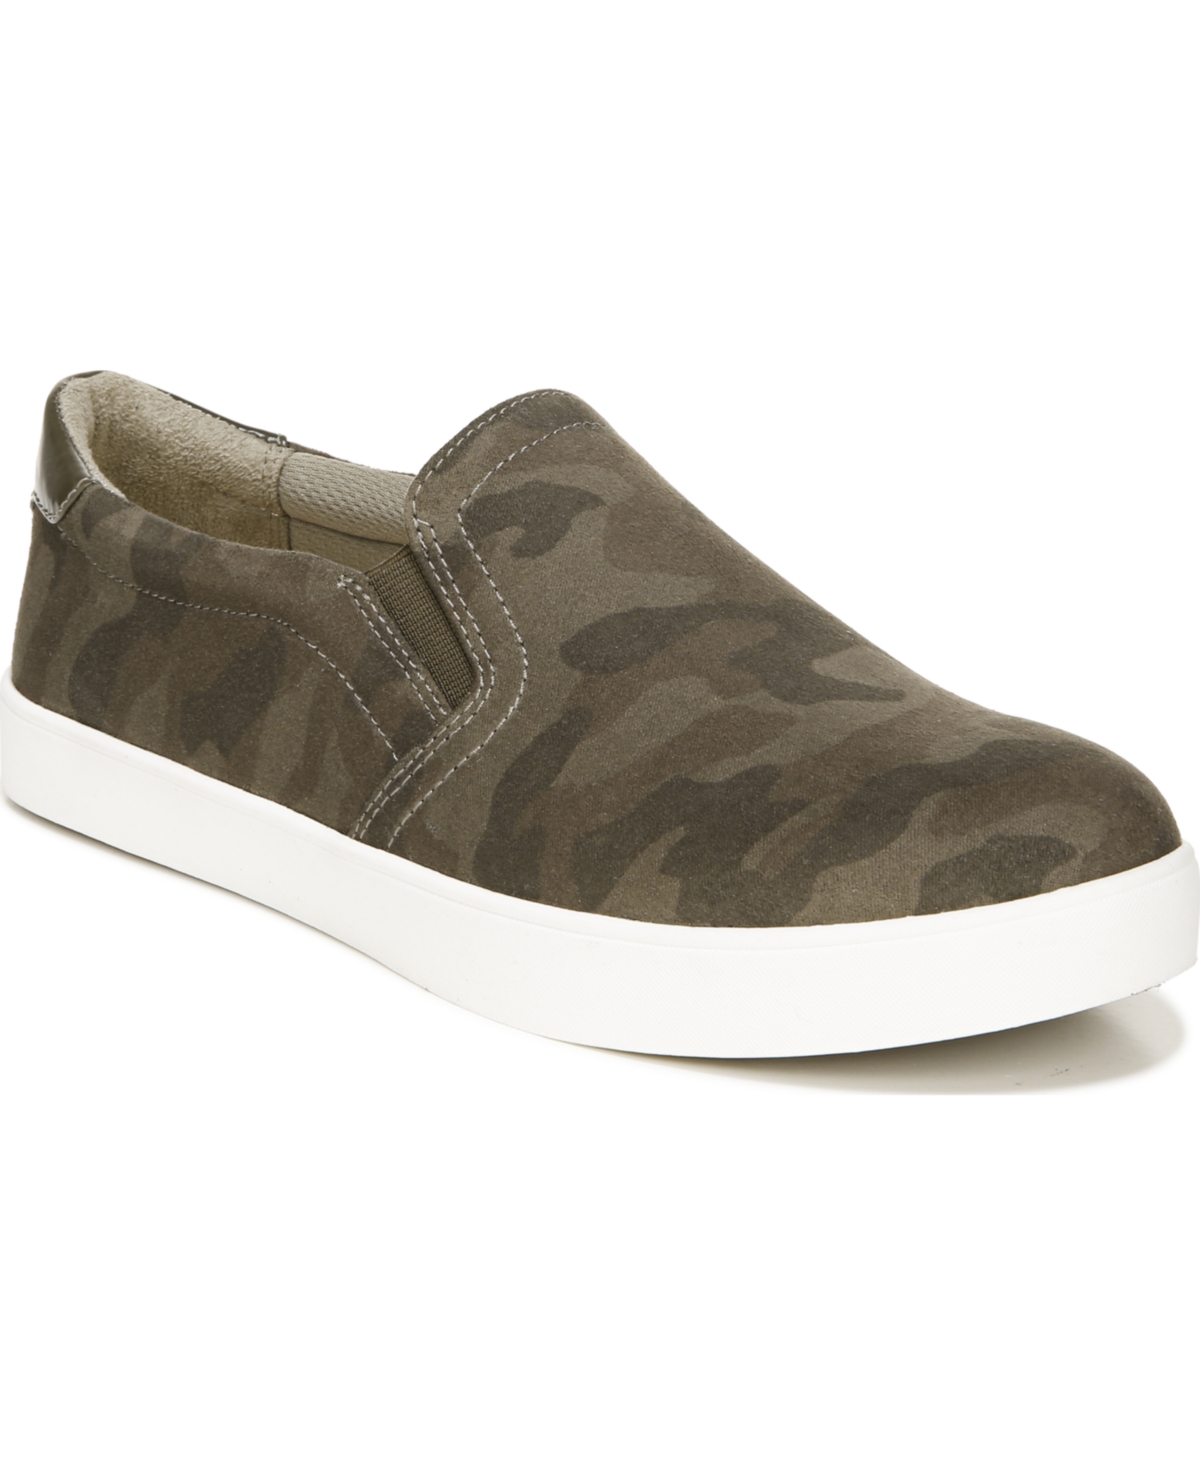 Dr. Scholl's Women's Madison Slip-on Sneakers In Olive Camo Microfiber